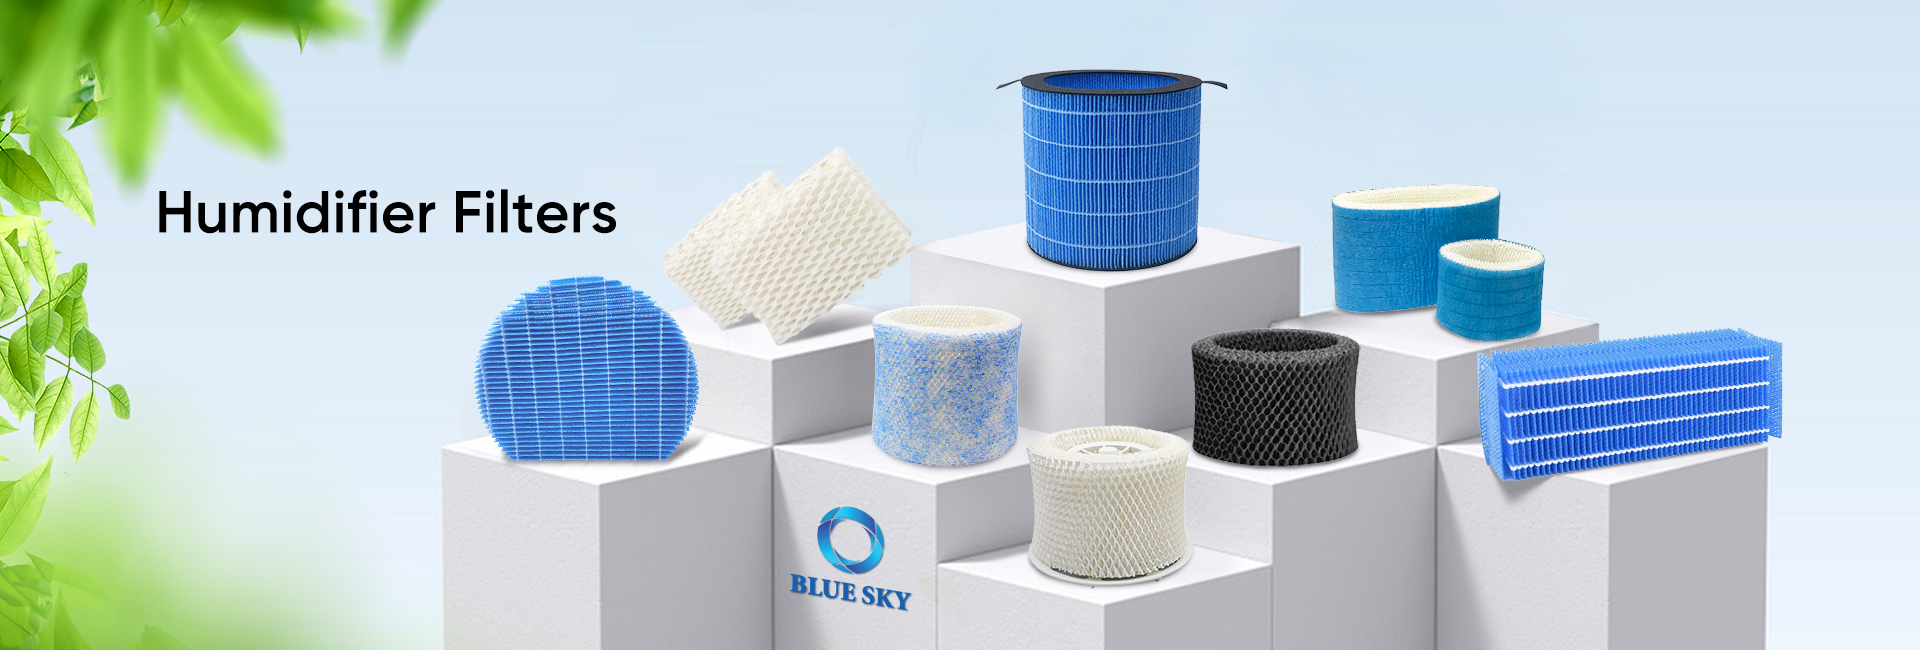 Humidifier Filter for Vornado Humidifier Filters